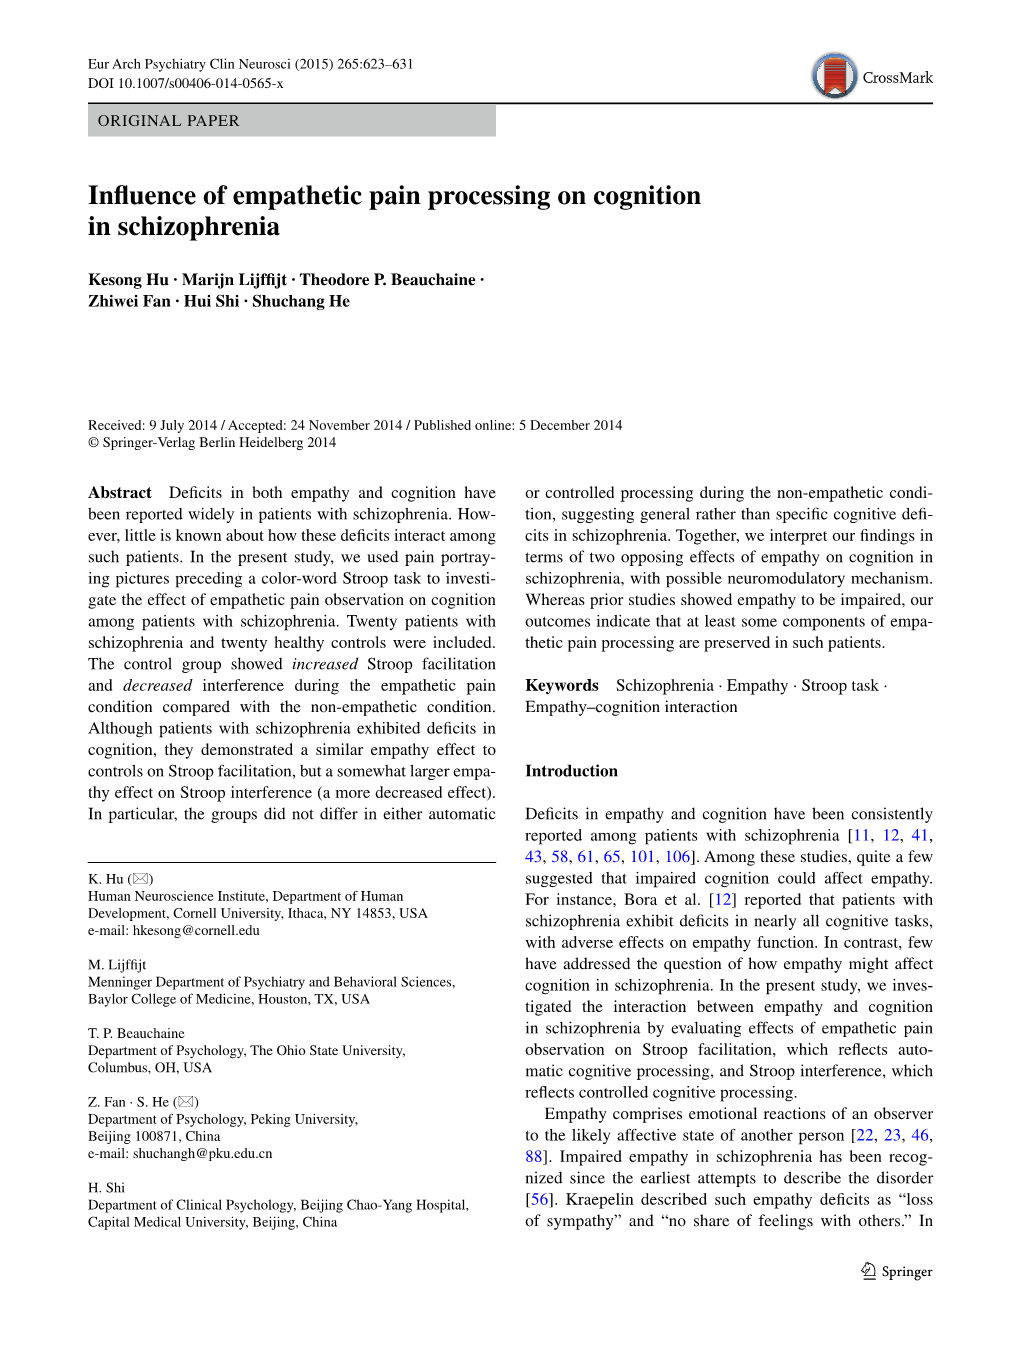 Influence of Empathetic Pain Processing on Cognition in Schizophrenia